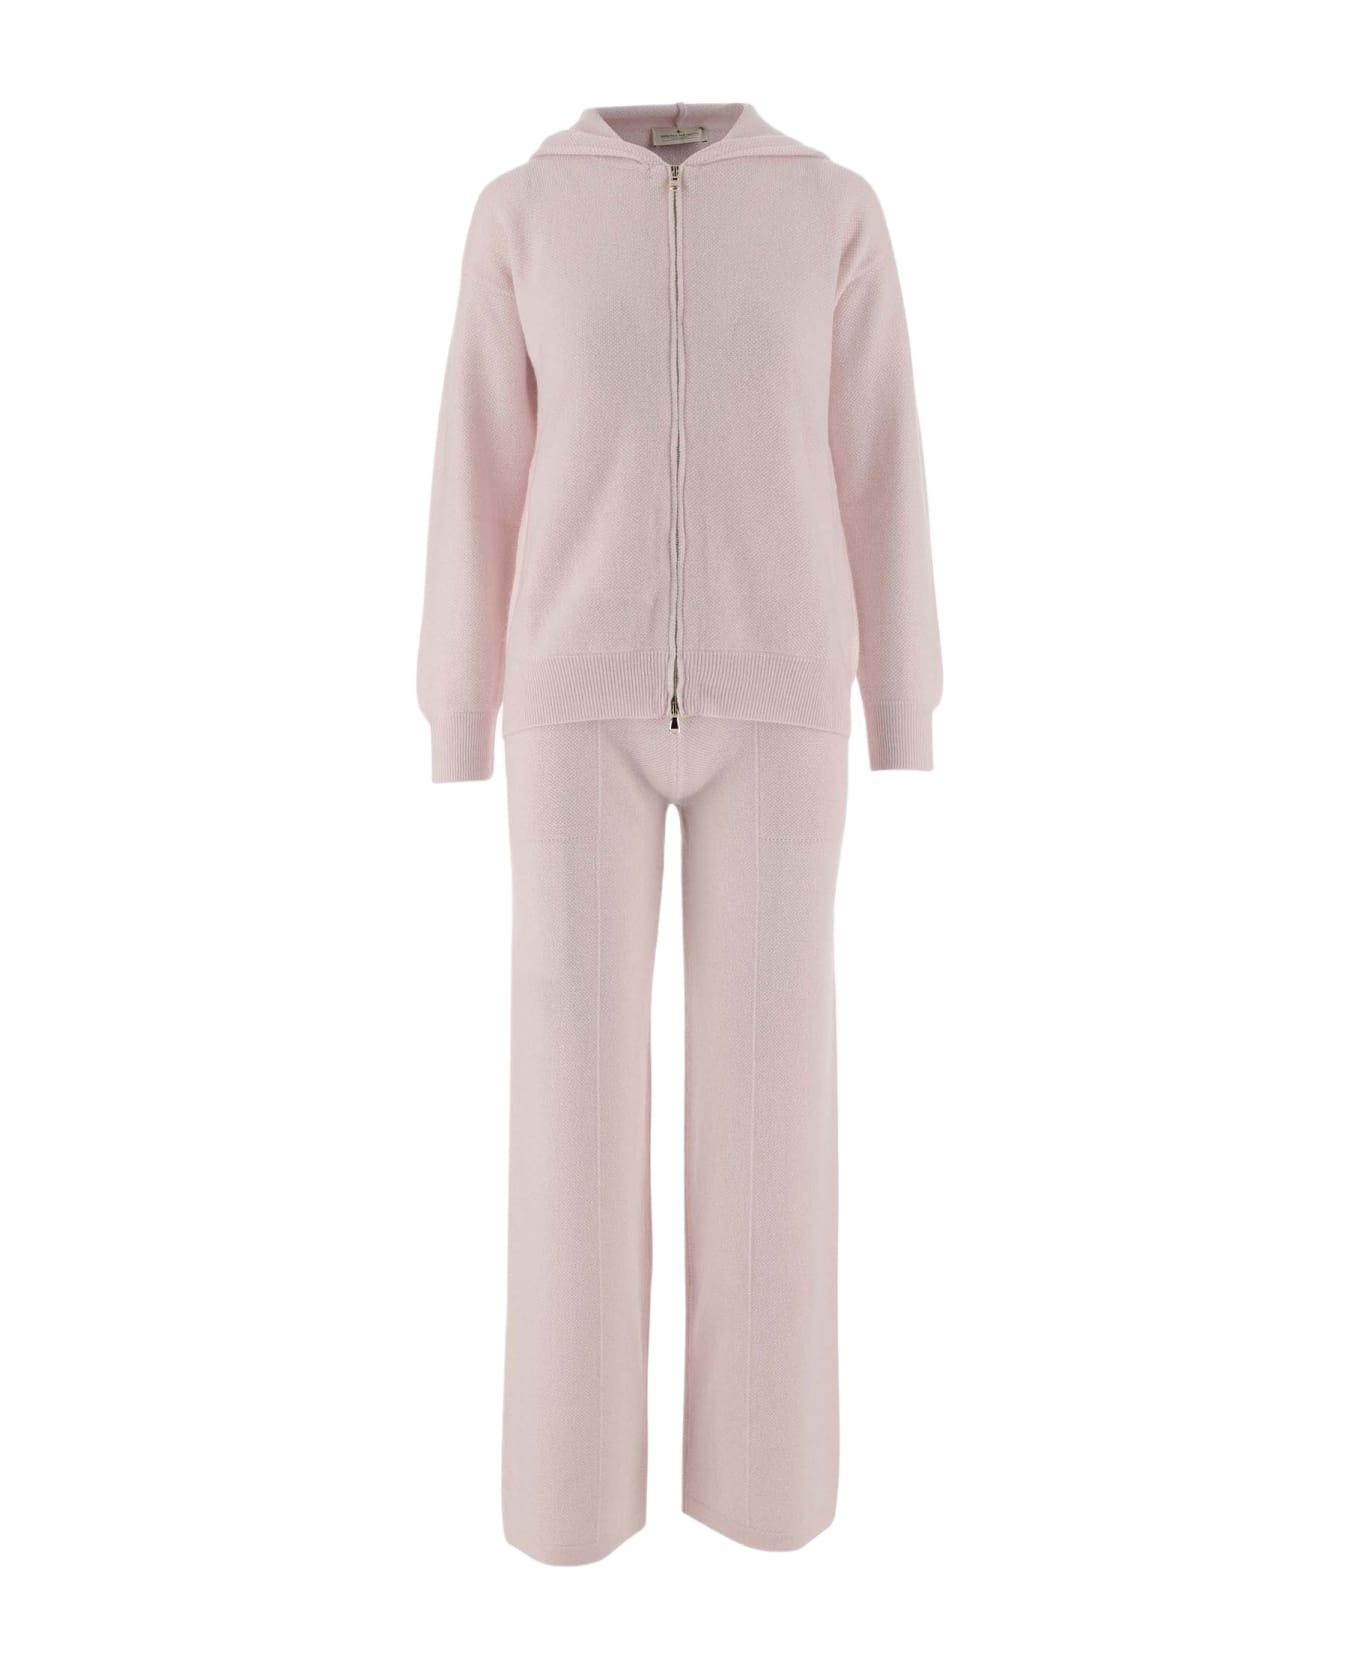 Bruno Manetti Cashmere Suit - Pink ボトムス